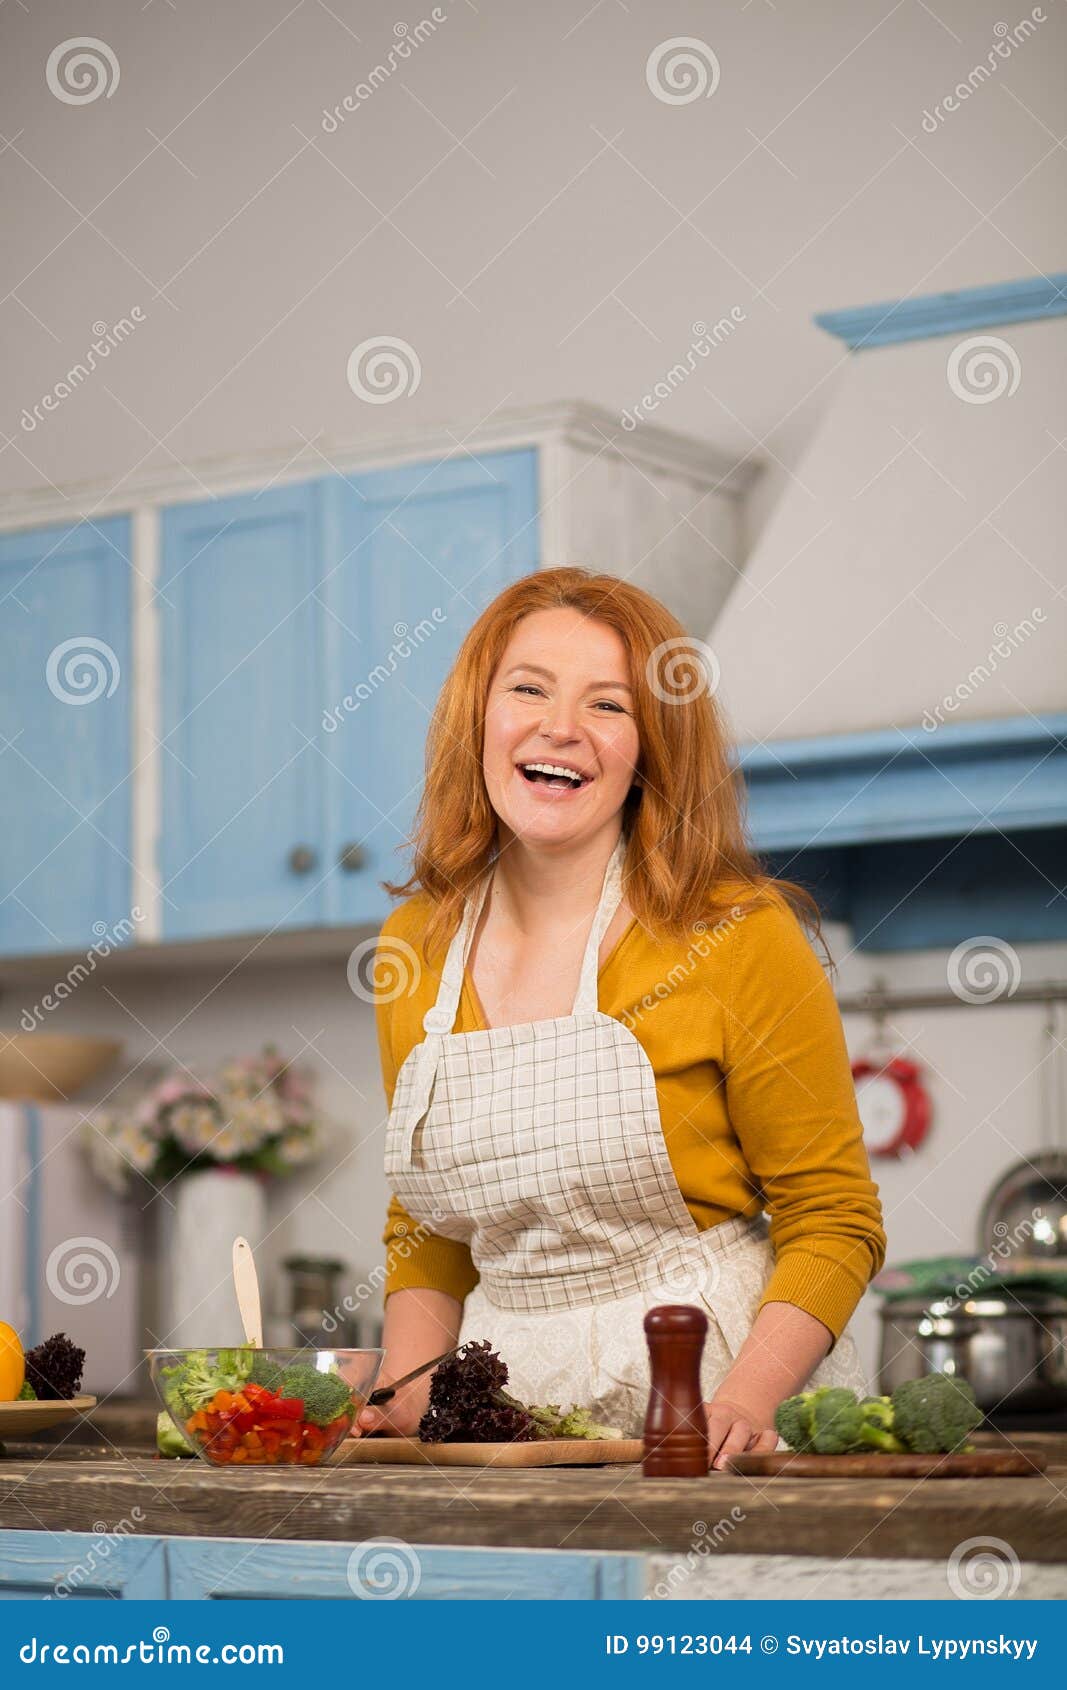 Housewife Cooking Kitchen Stock Photos - Royalty Free Pictures-5062